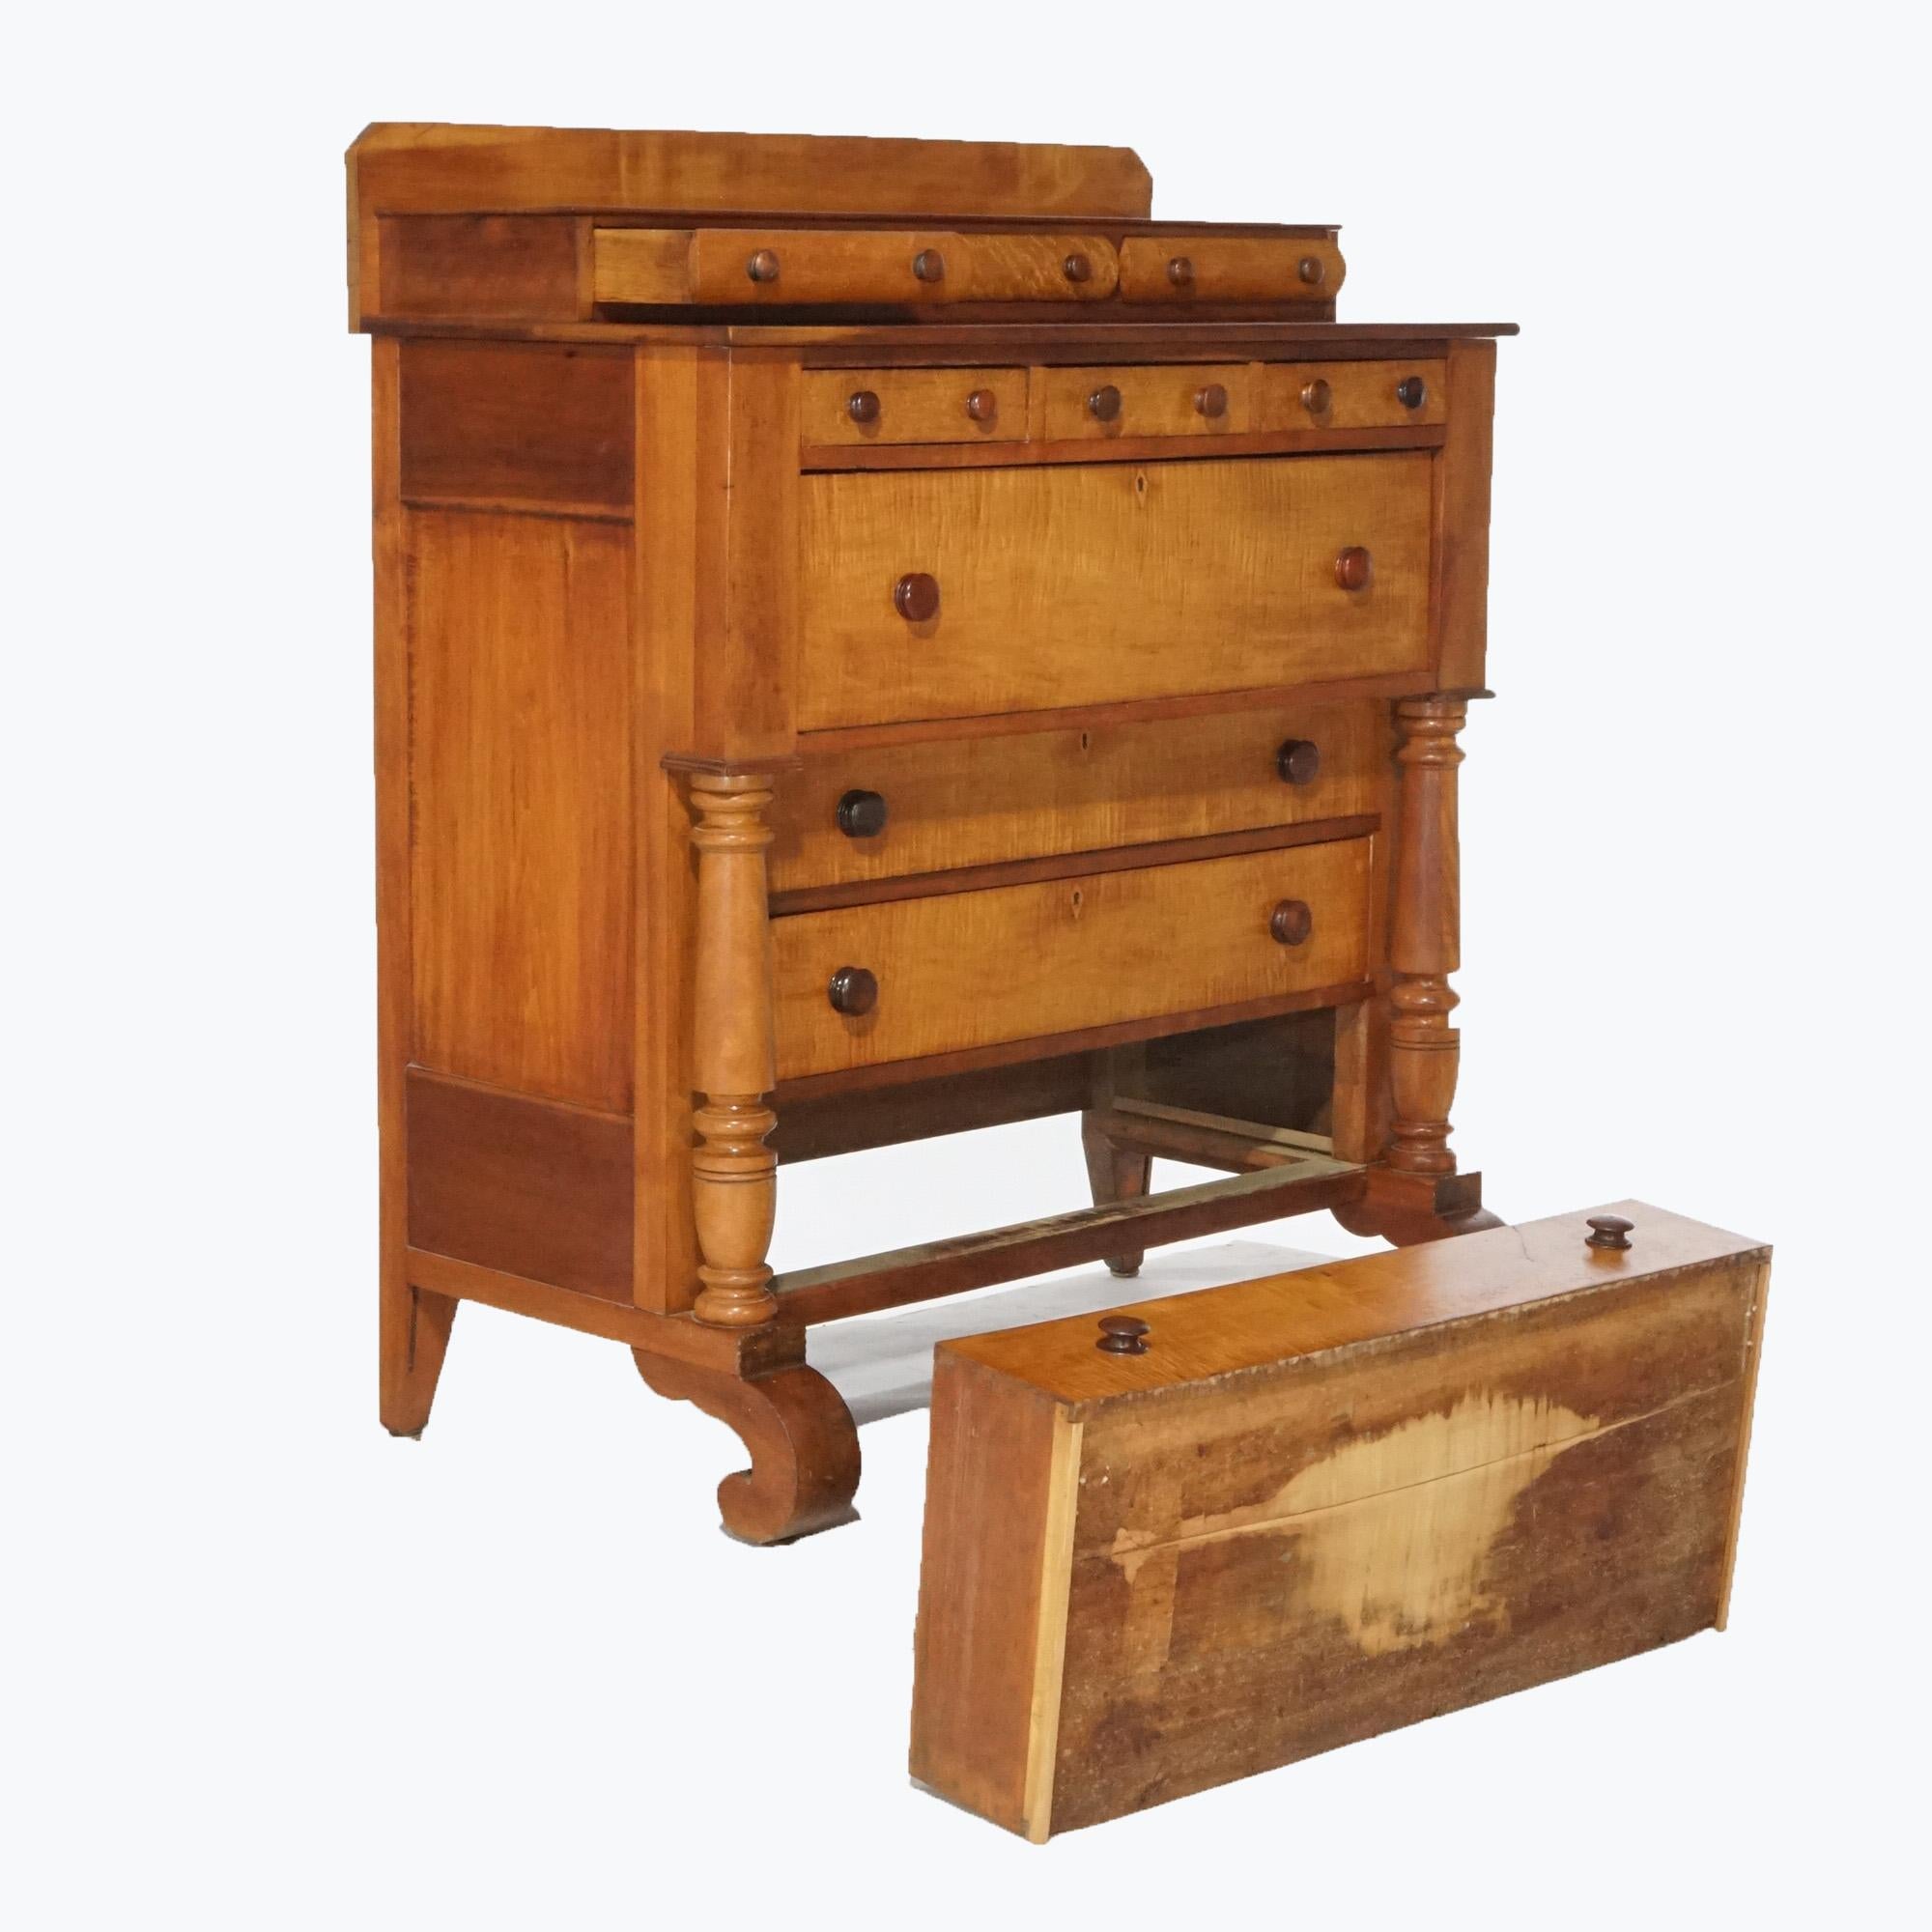 An antique American Empire chest of drawers offers tiger maple and cherry construction with backsplash having convex drawers over paneled case having deep frieze drawer over lower long drawers flanked by full columns and raised on scroll form feet,